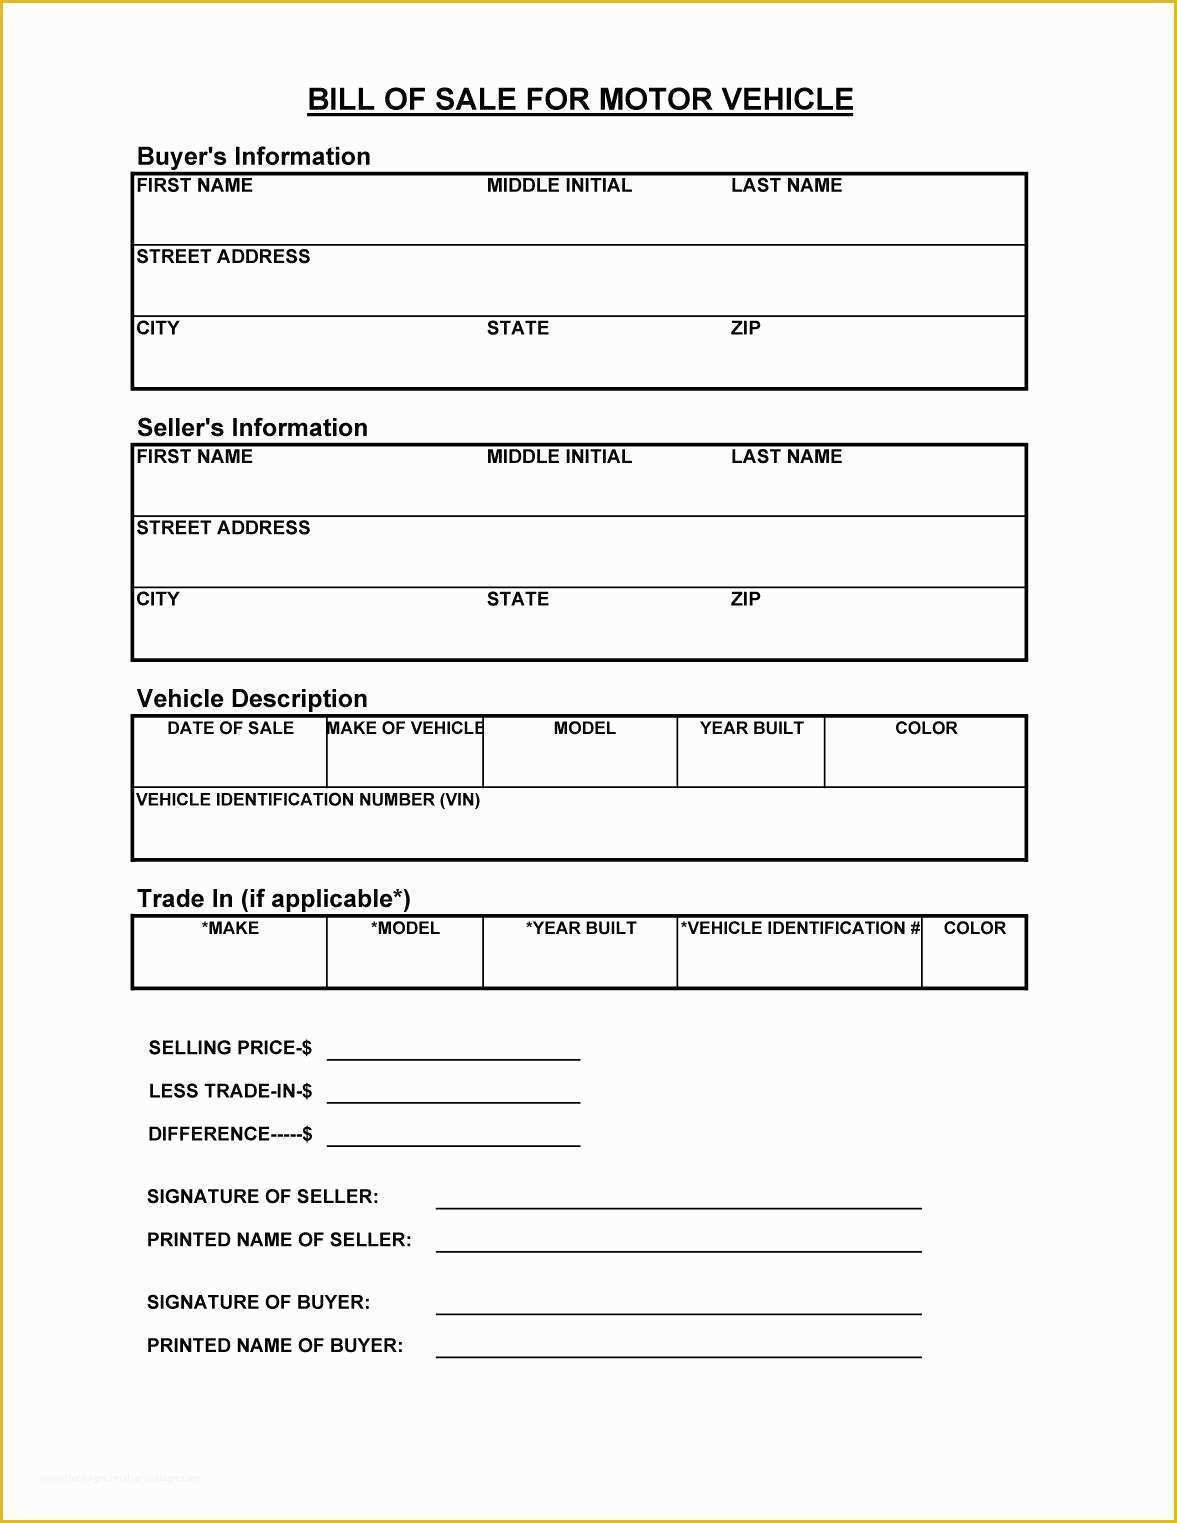 Free Bill Of Sale Template Download Of 45 Fee Printable Bill Of Sale Templates Car Boat Gun